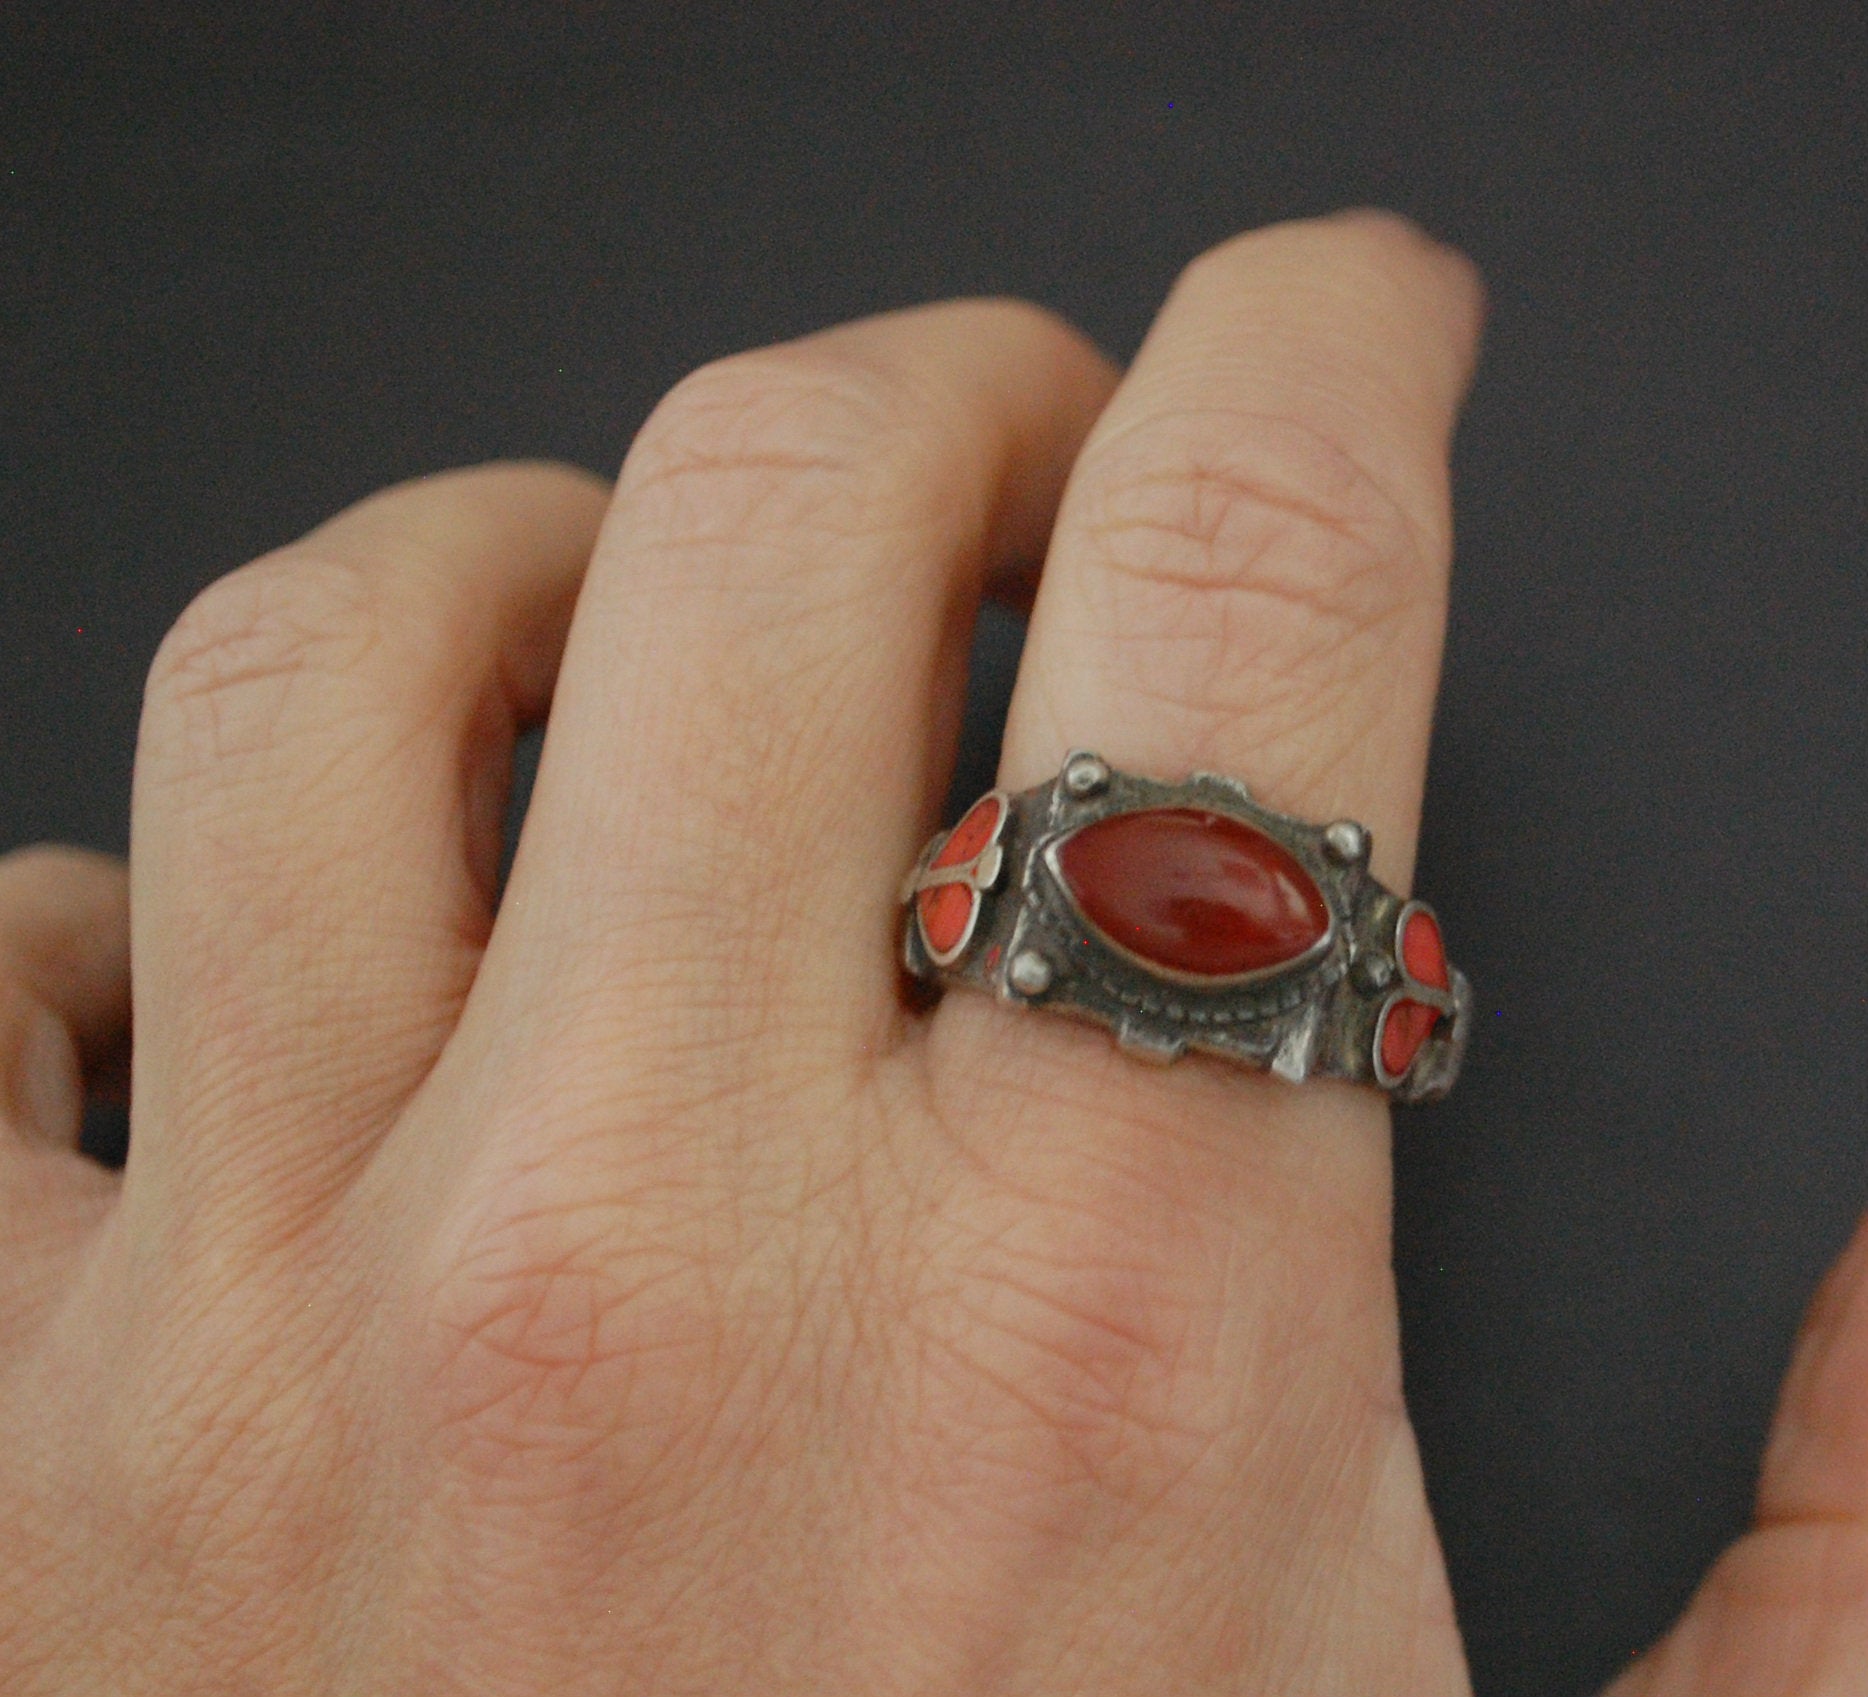 Old Afghani Coral and Carnelian Ring - Size 10.5